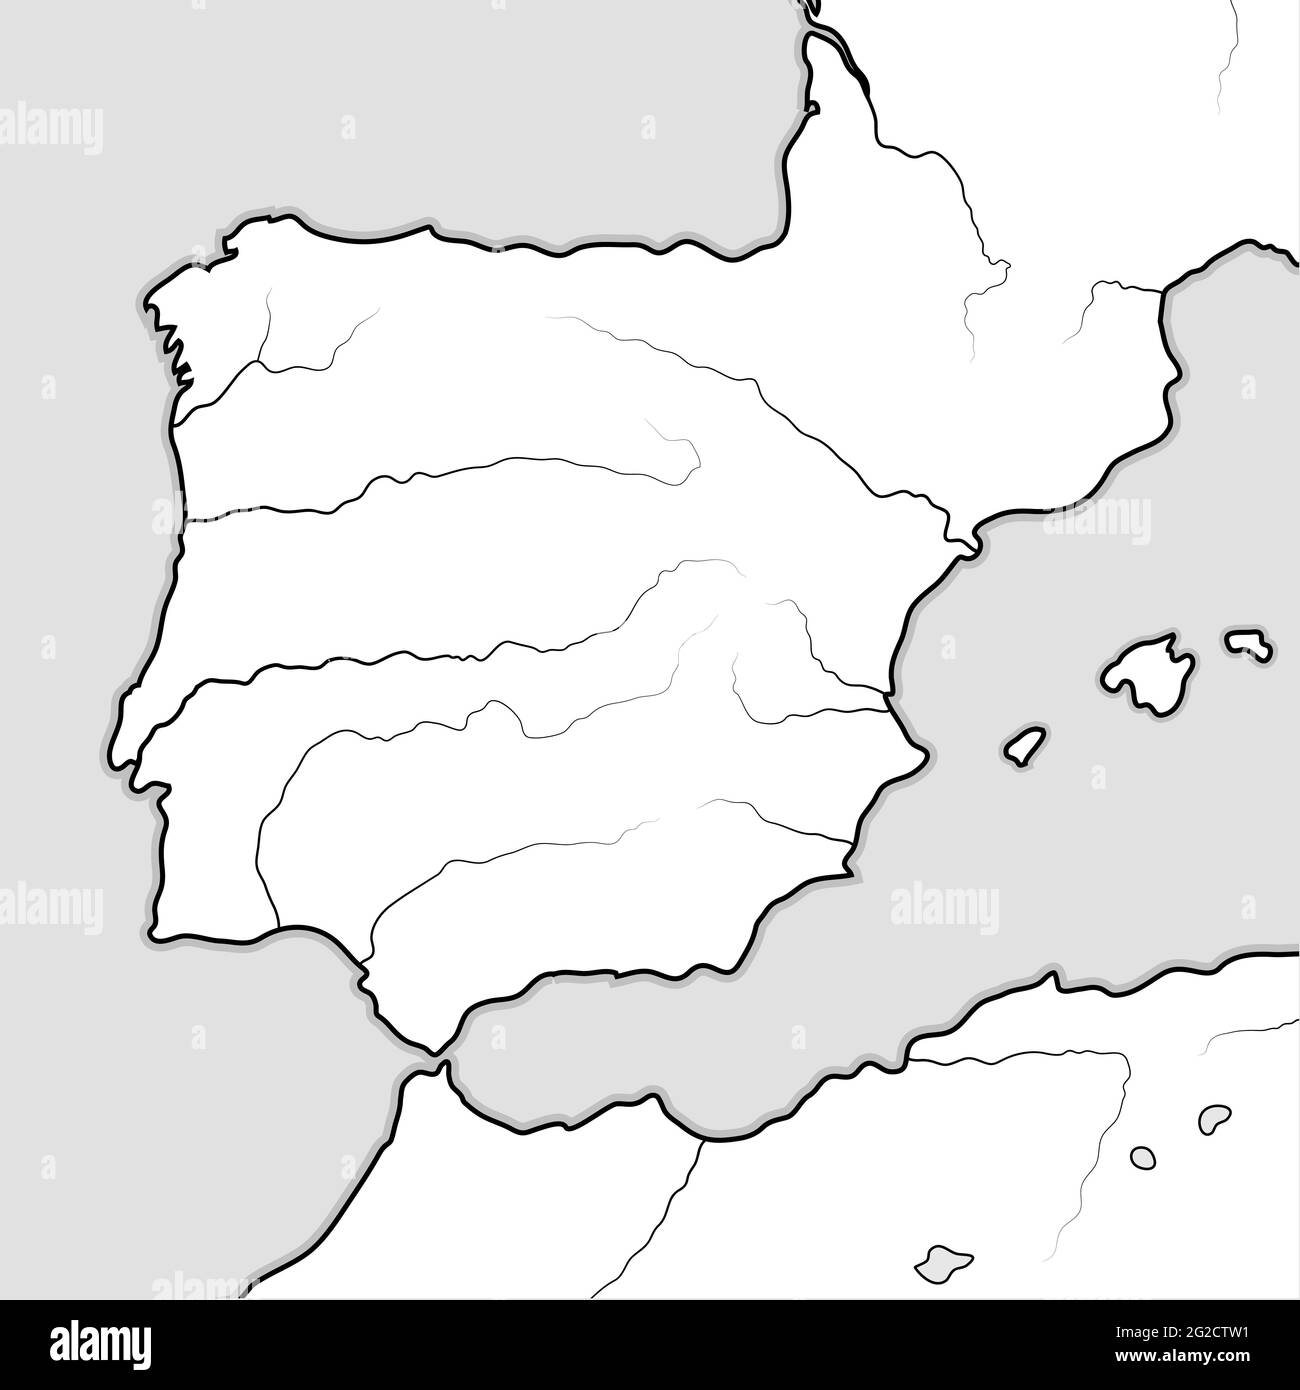 Map of The SPANISH Lands: Spain, Portugal, Catalonia, Iberia, The Pyrenees. Geographic chart. Stock Photo